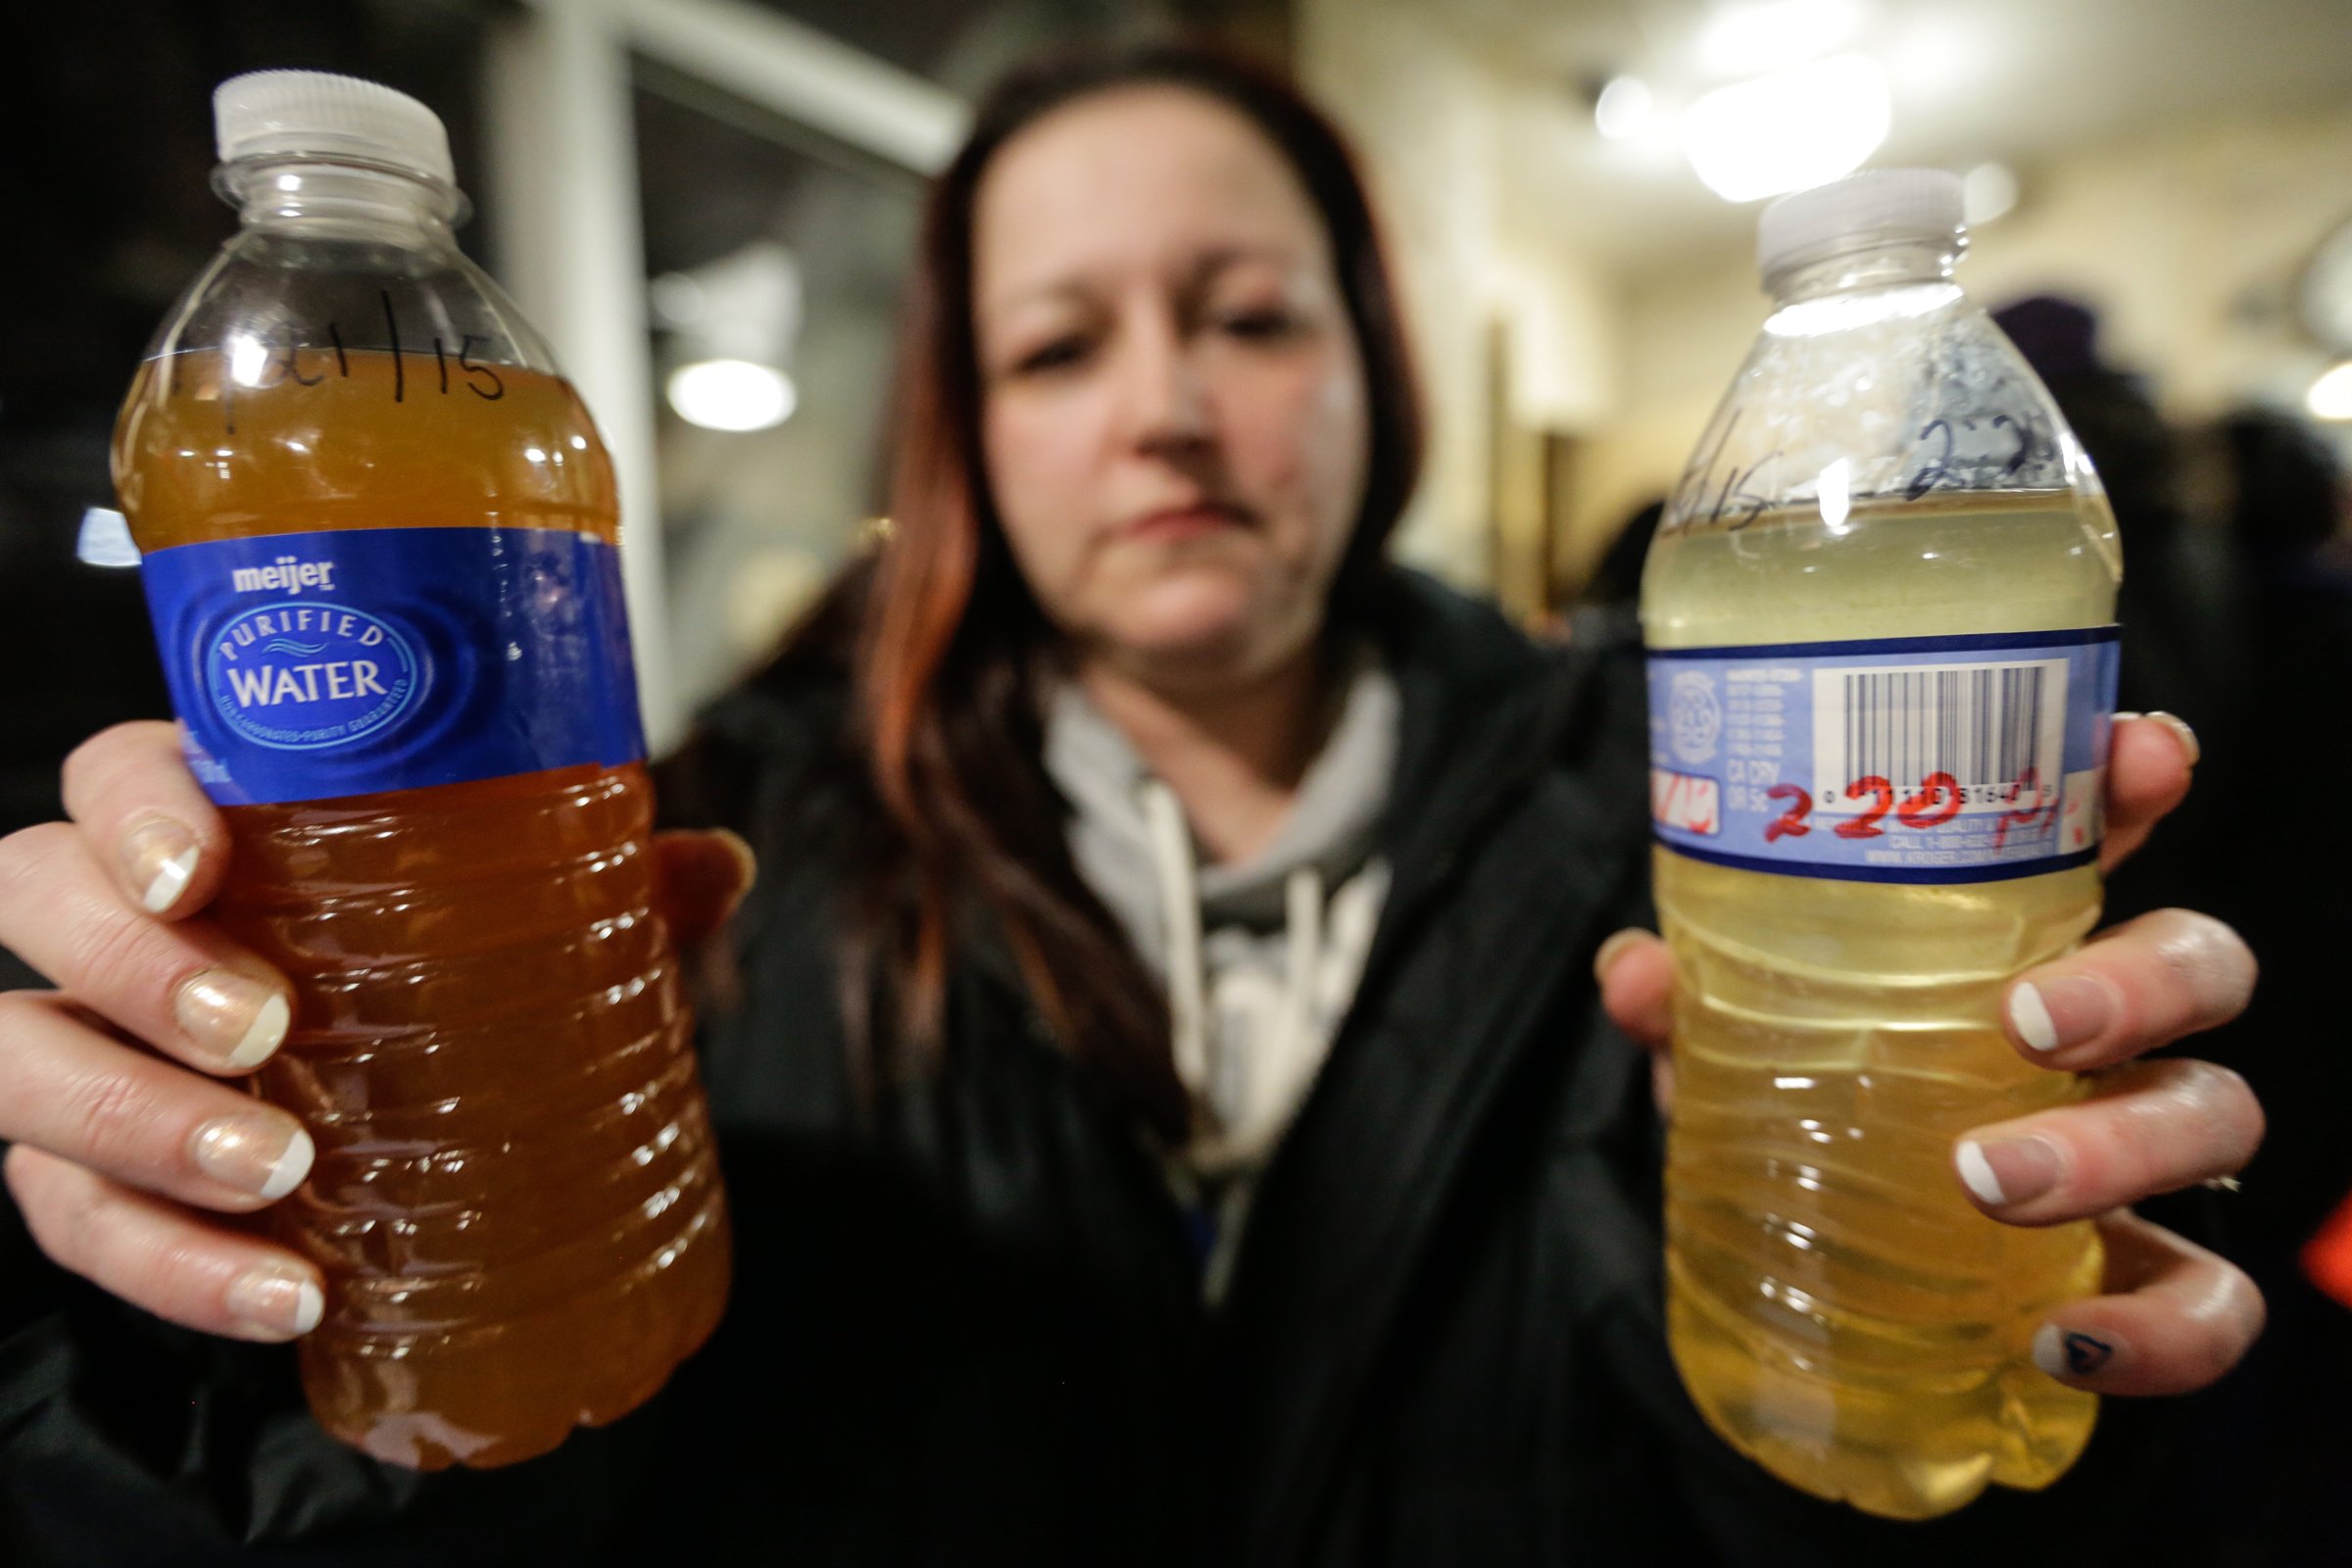 LeeAnne Walters 36 of Flint shows water samples from her home from Wednesday January 21, 2015.